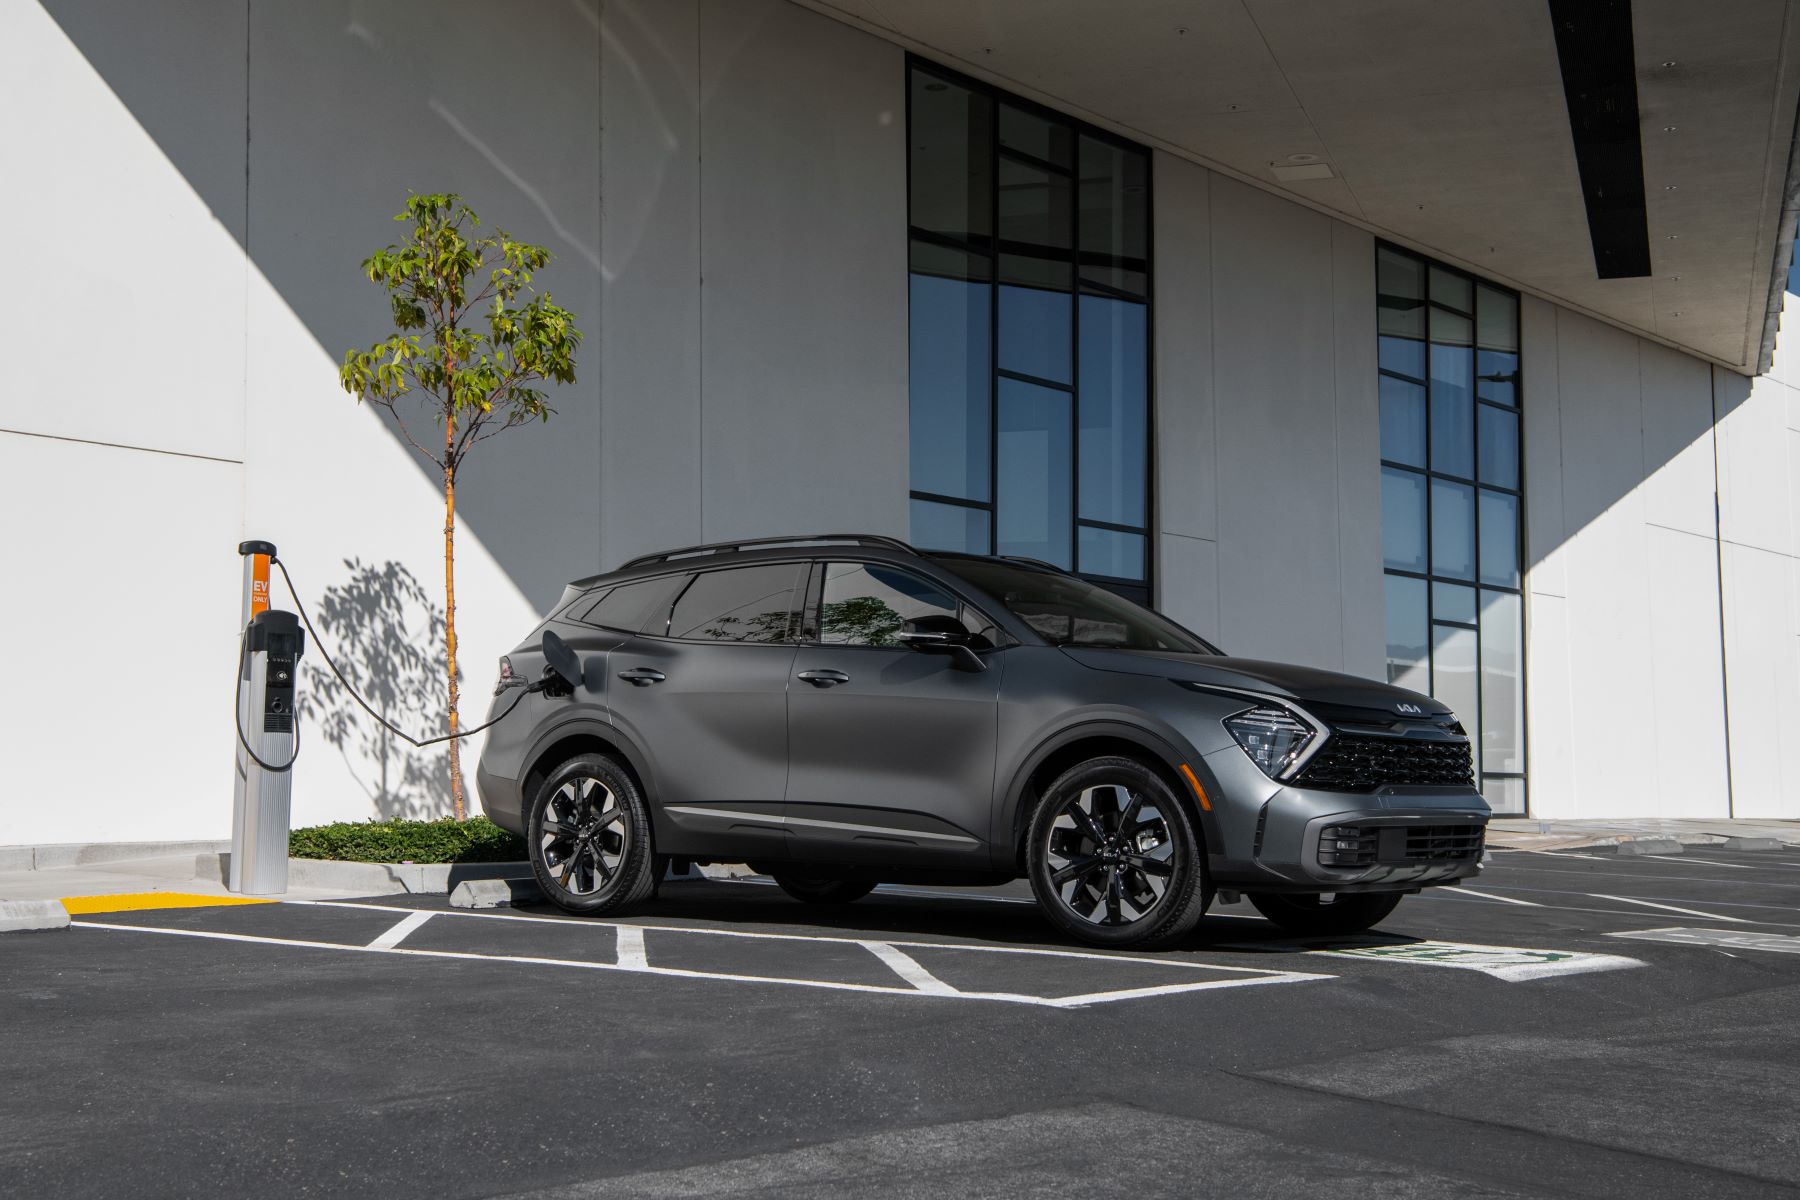 A dark gray 2023 Kia Sportage plug-in hybrid electric vehicle (PHEV) compact SUV plugged into a charging station